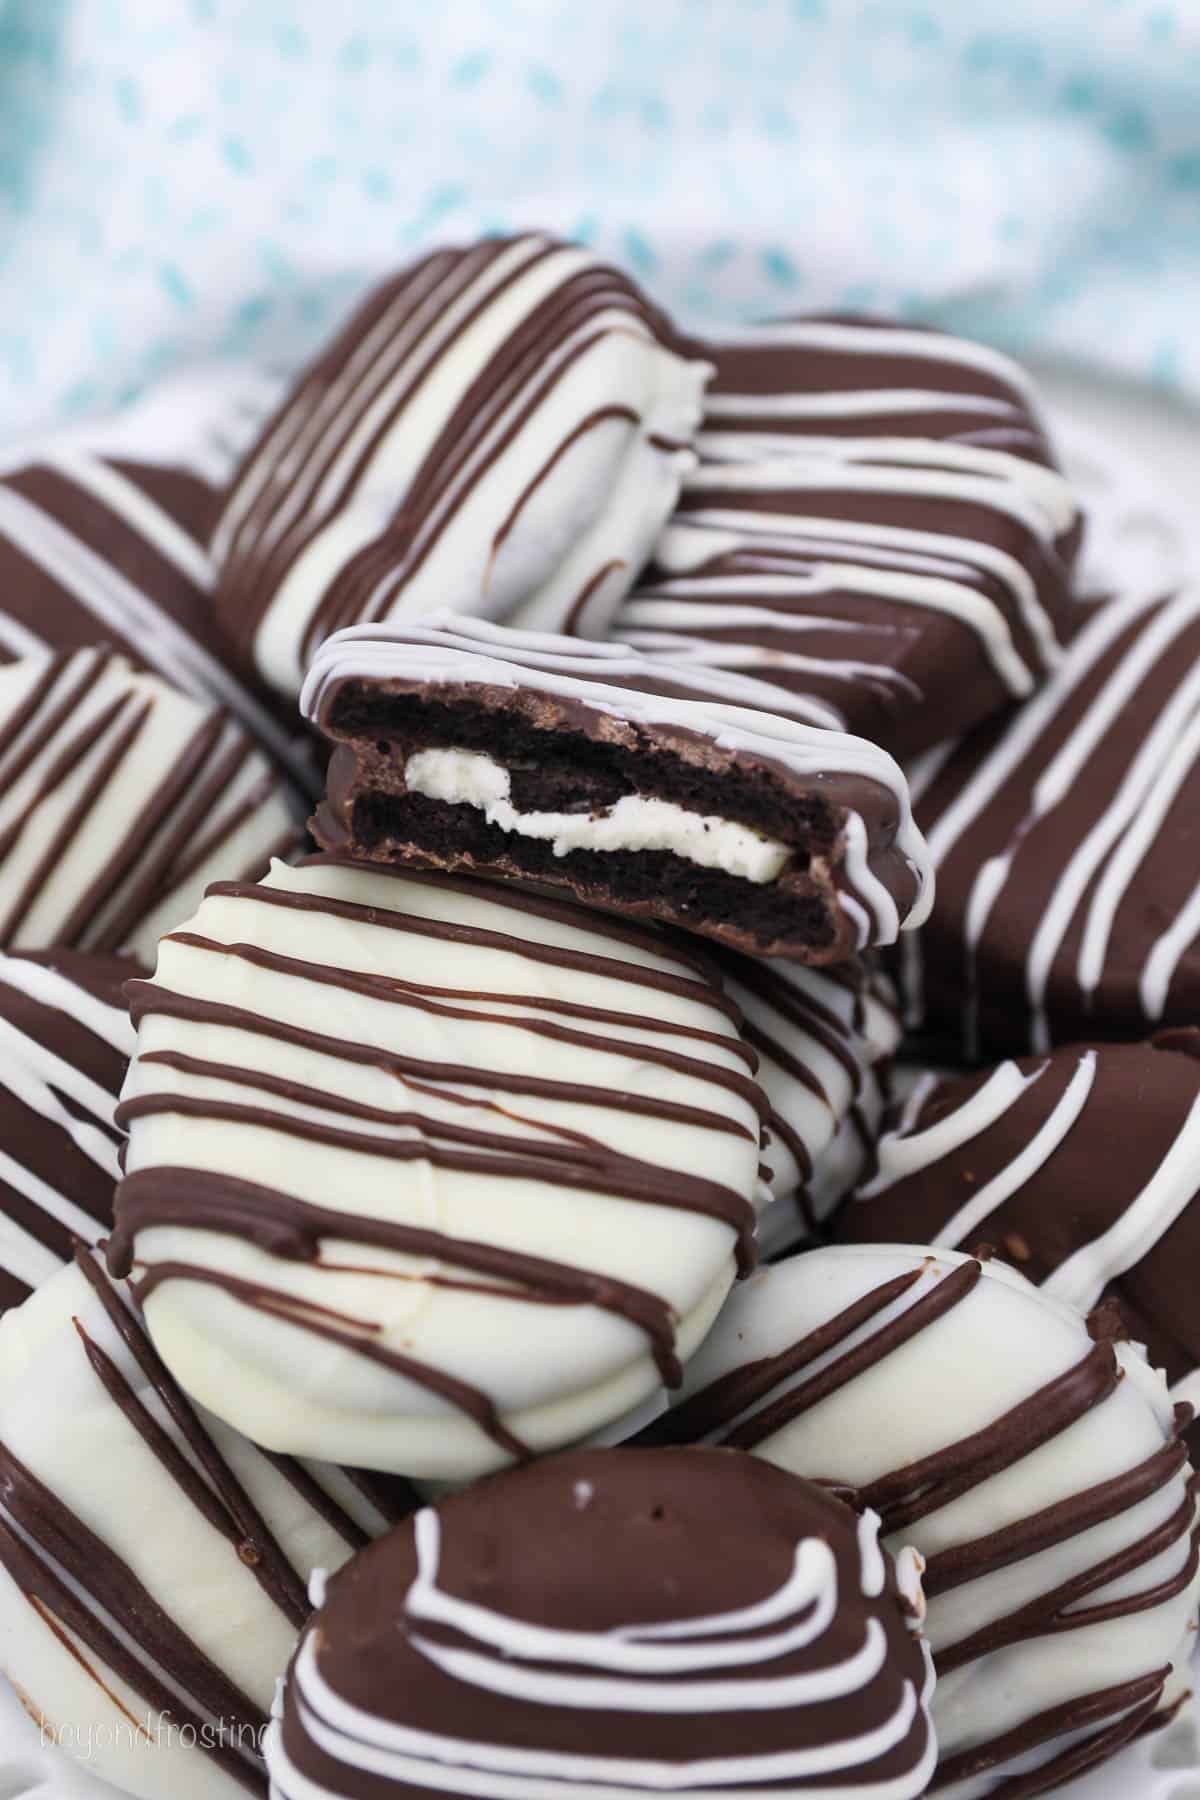 A Pile of Chocolate Covered Oreos with Chocolate Drizzle on a Plate